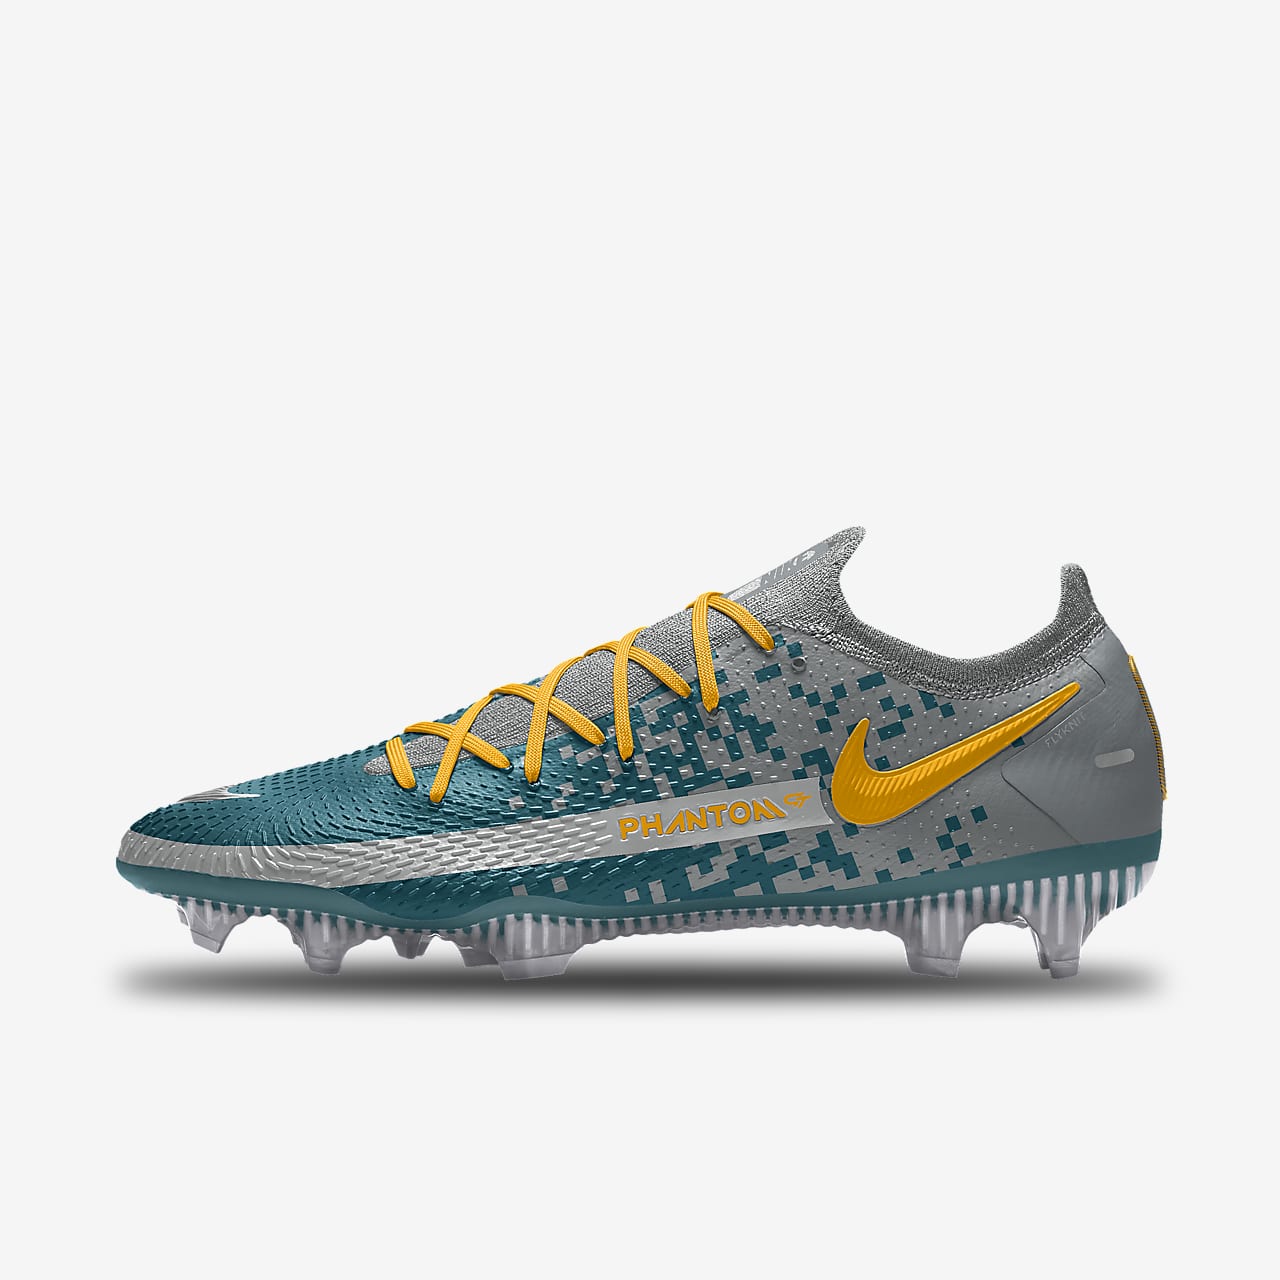 unreleased soccer cleats